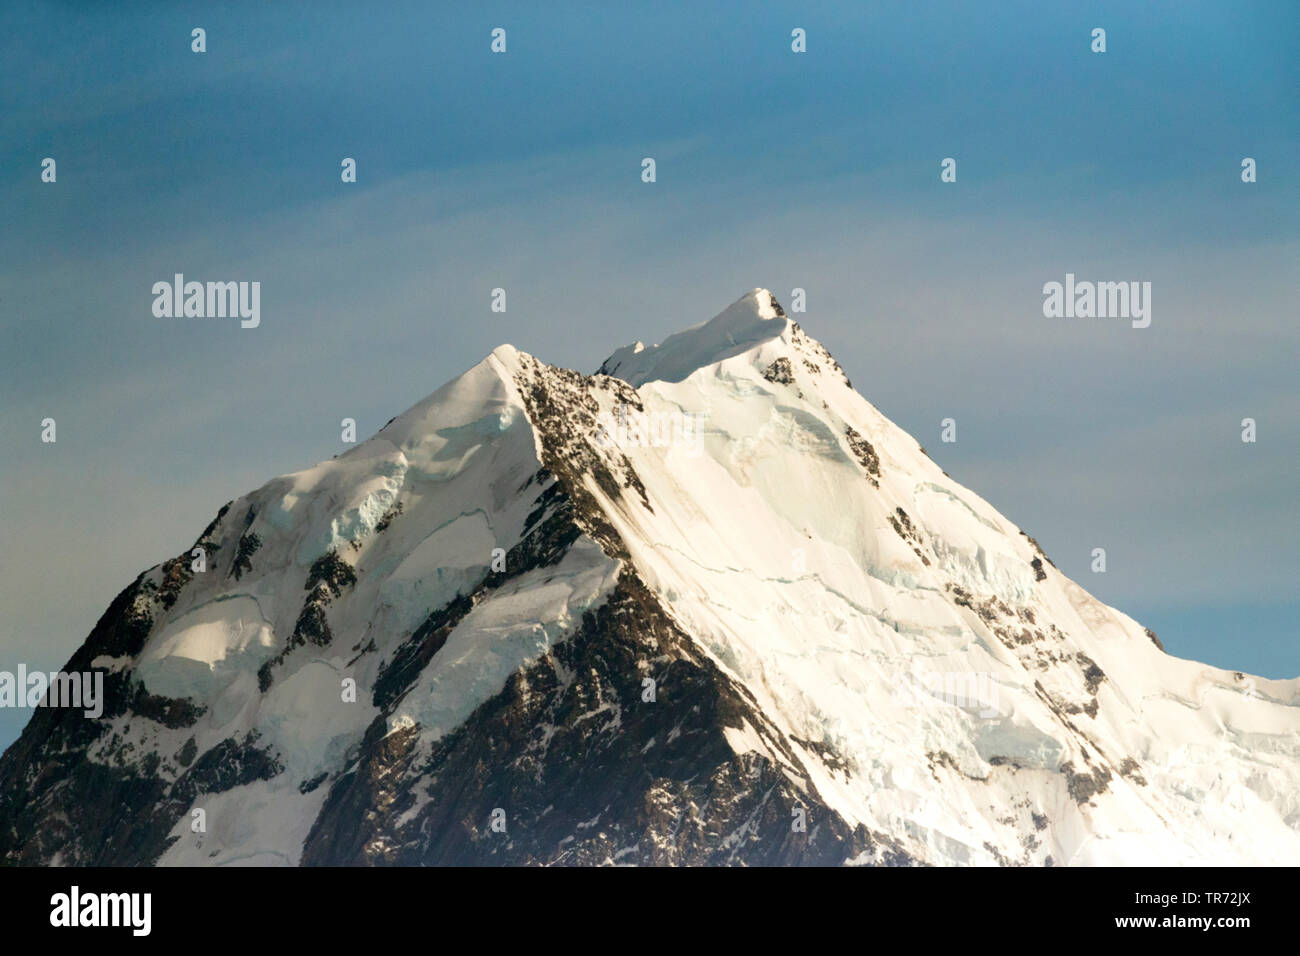 Snow-covered peak in the Mount cook mountain range, New Zealand, Southern Island, Glenntanner area Stock Photo